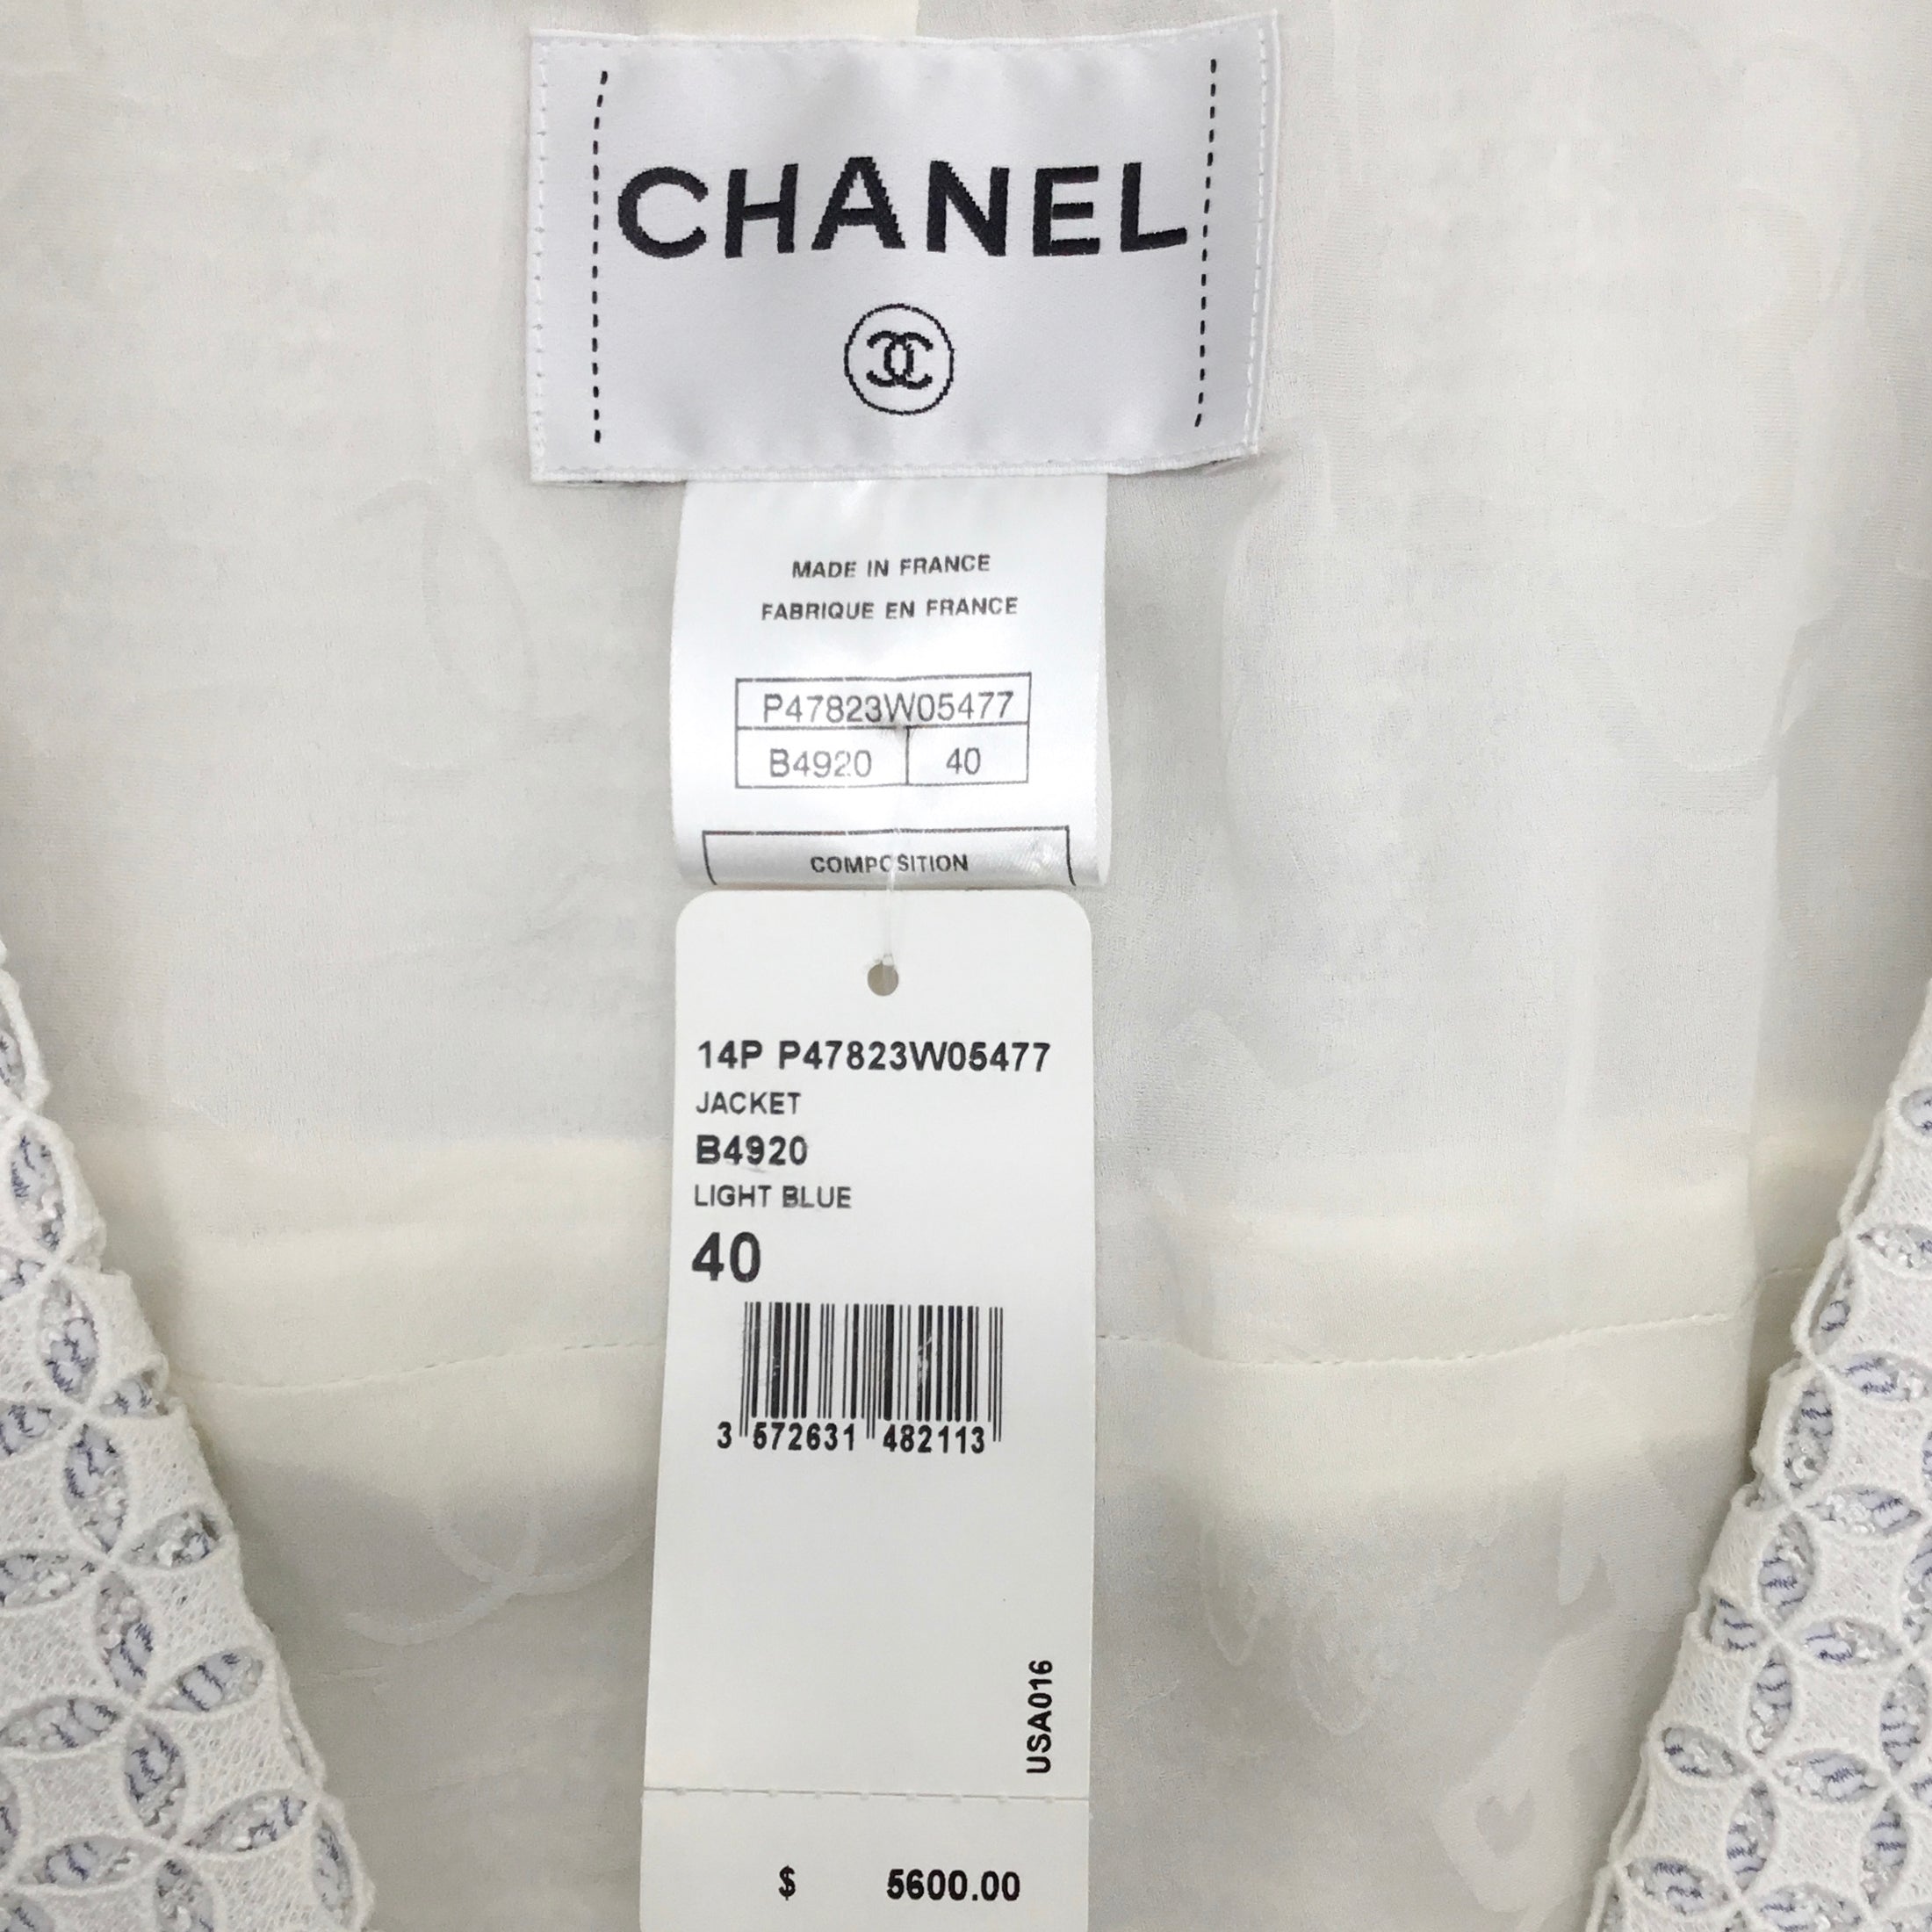 Chanel Grey and White Eyelet Dress with Jacket